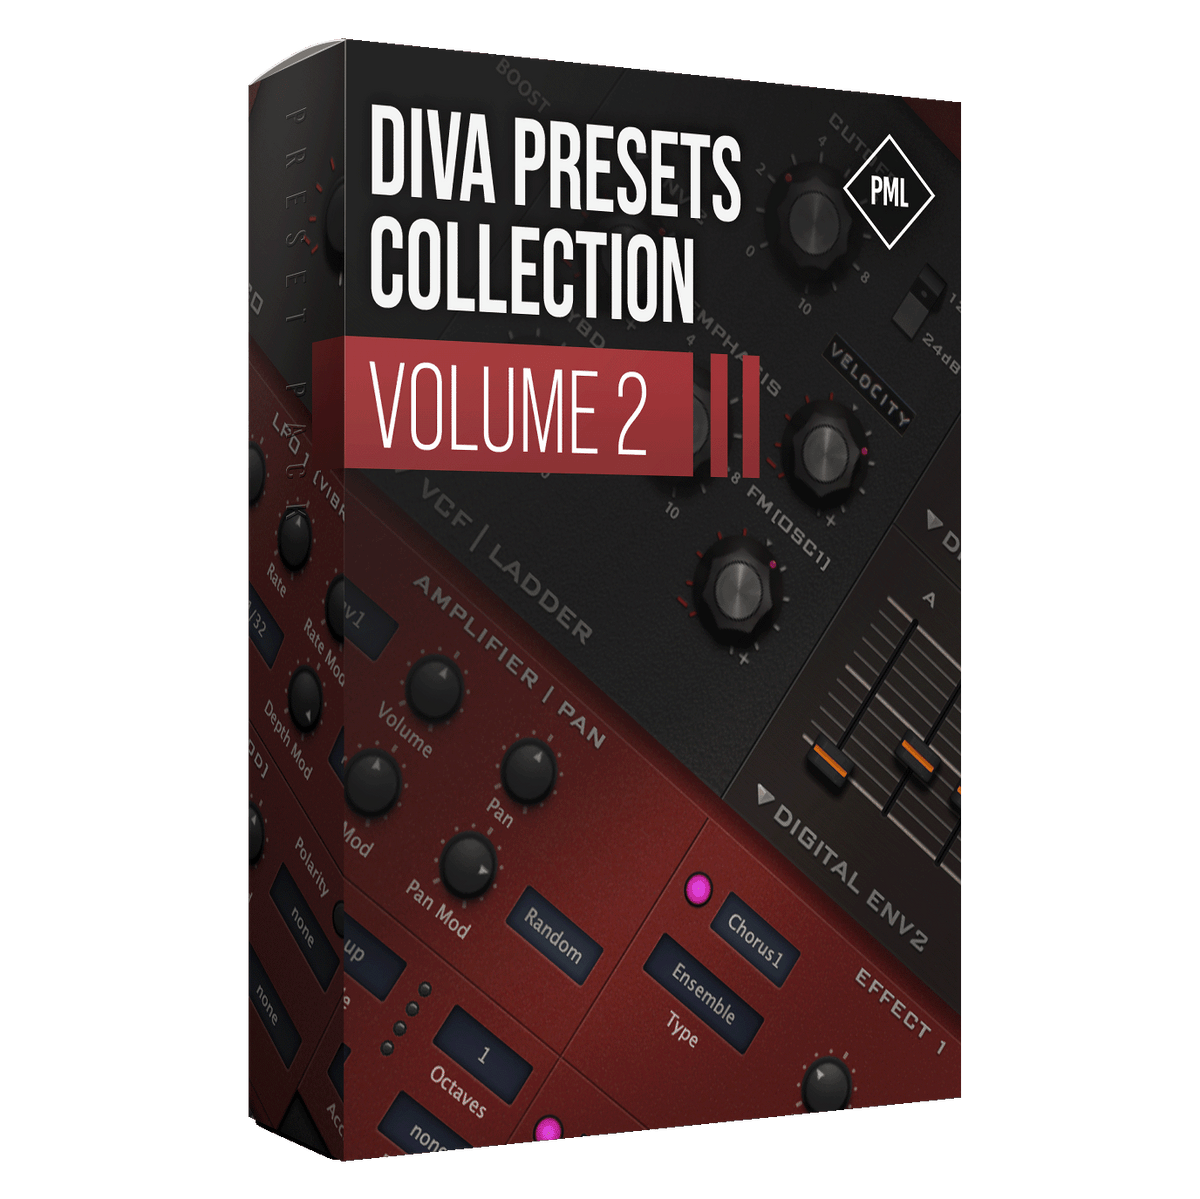 Diva Presets Collection Vol.2 Product Box